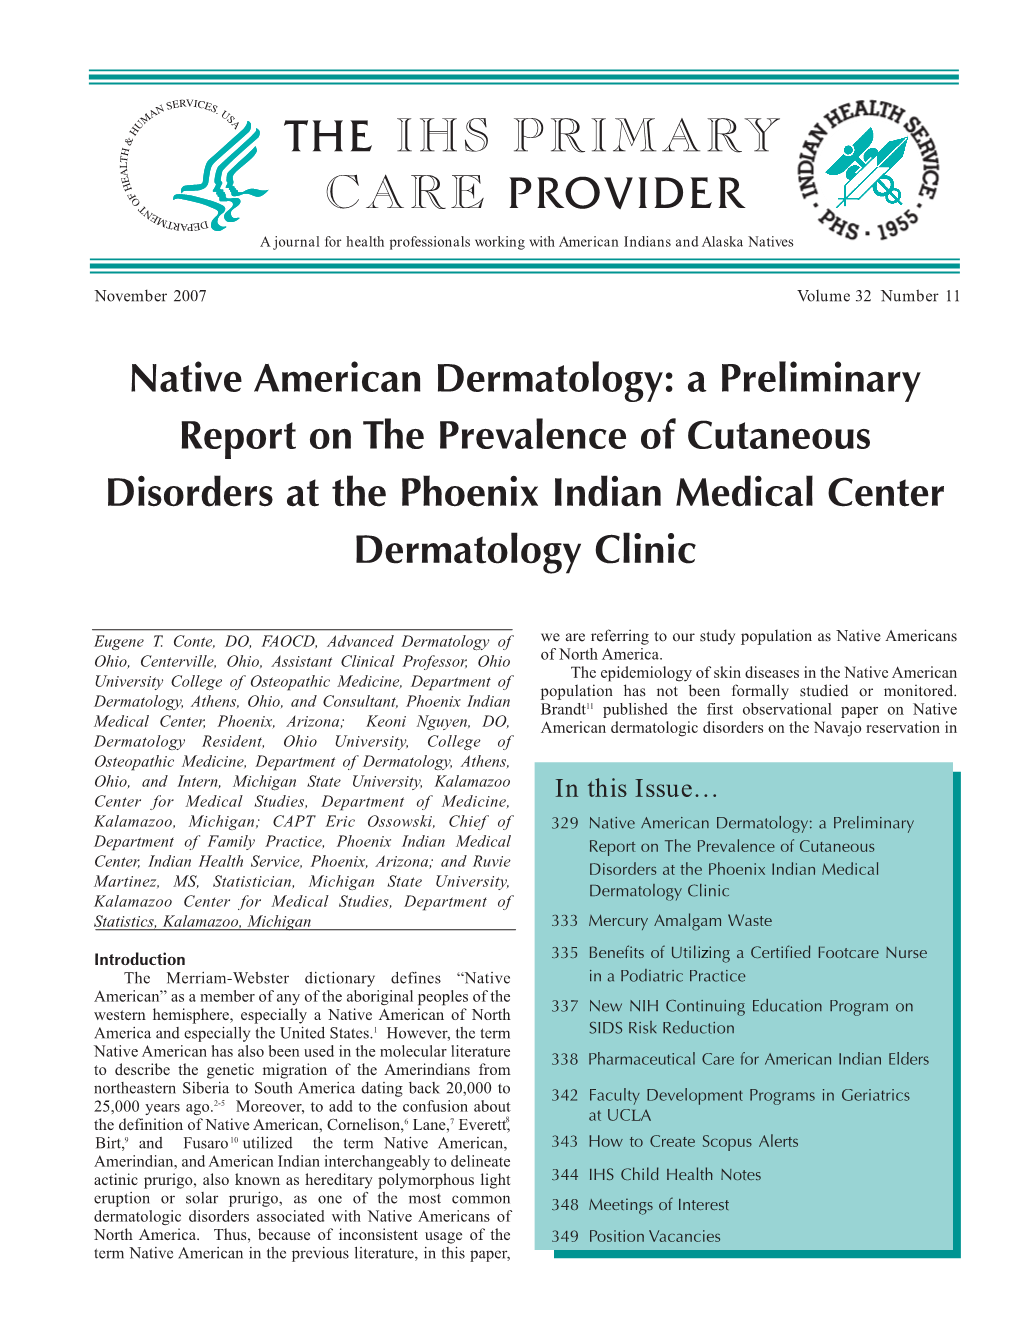 IHS Primary Care Provider Newsletter